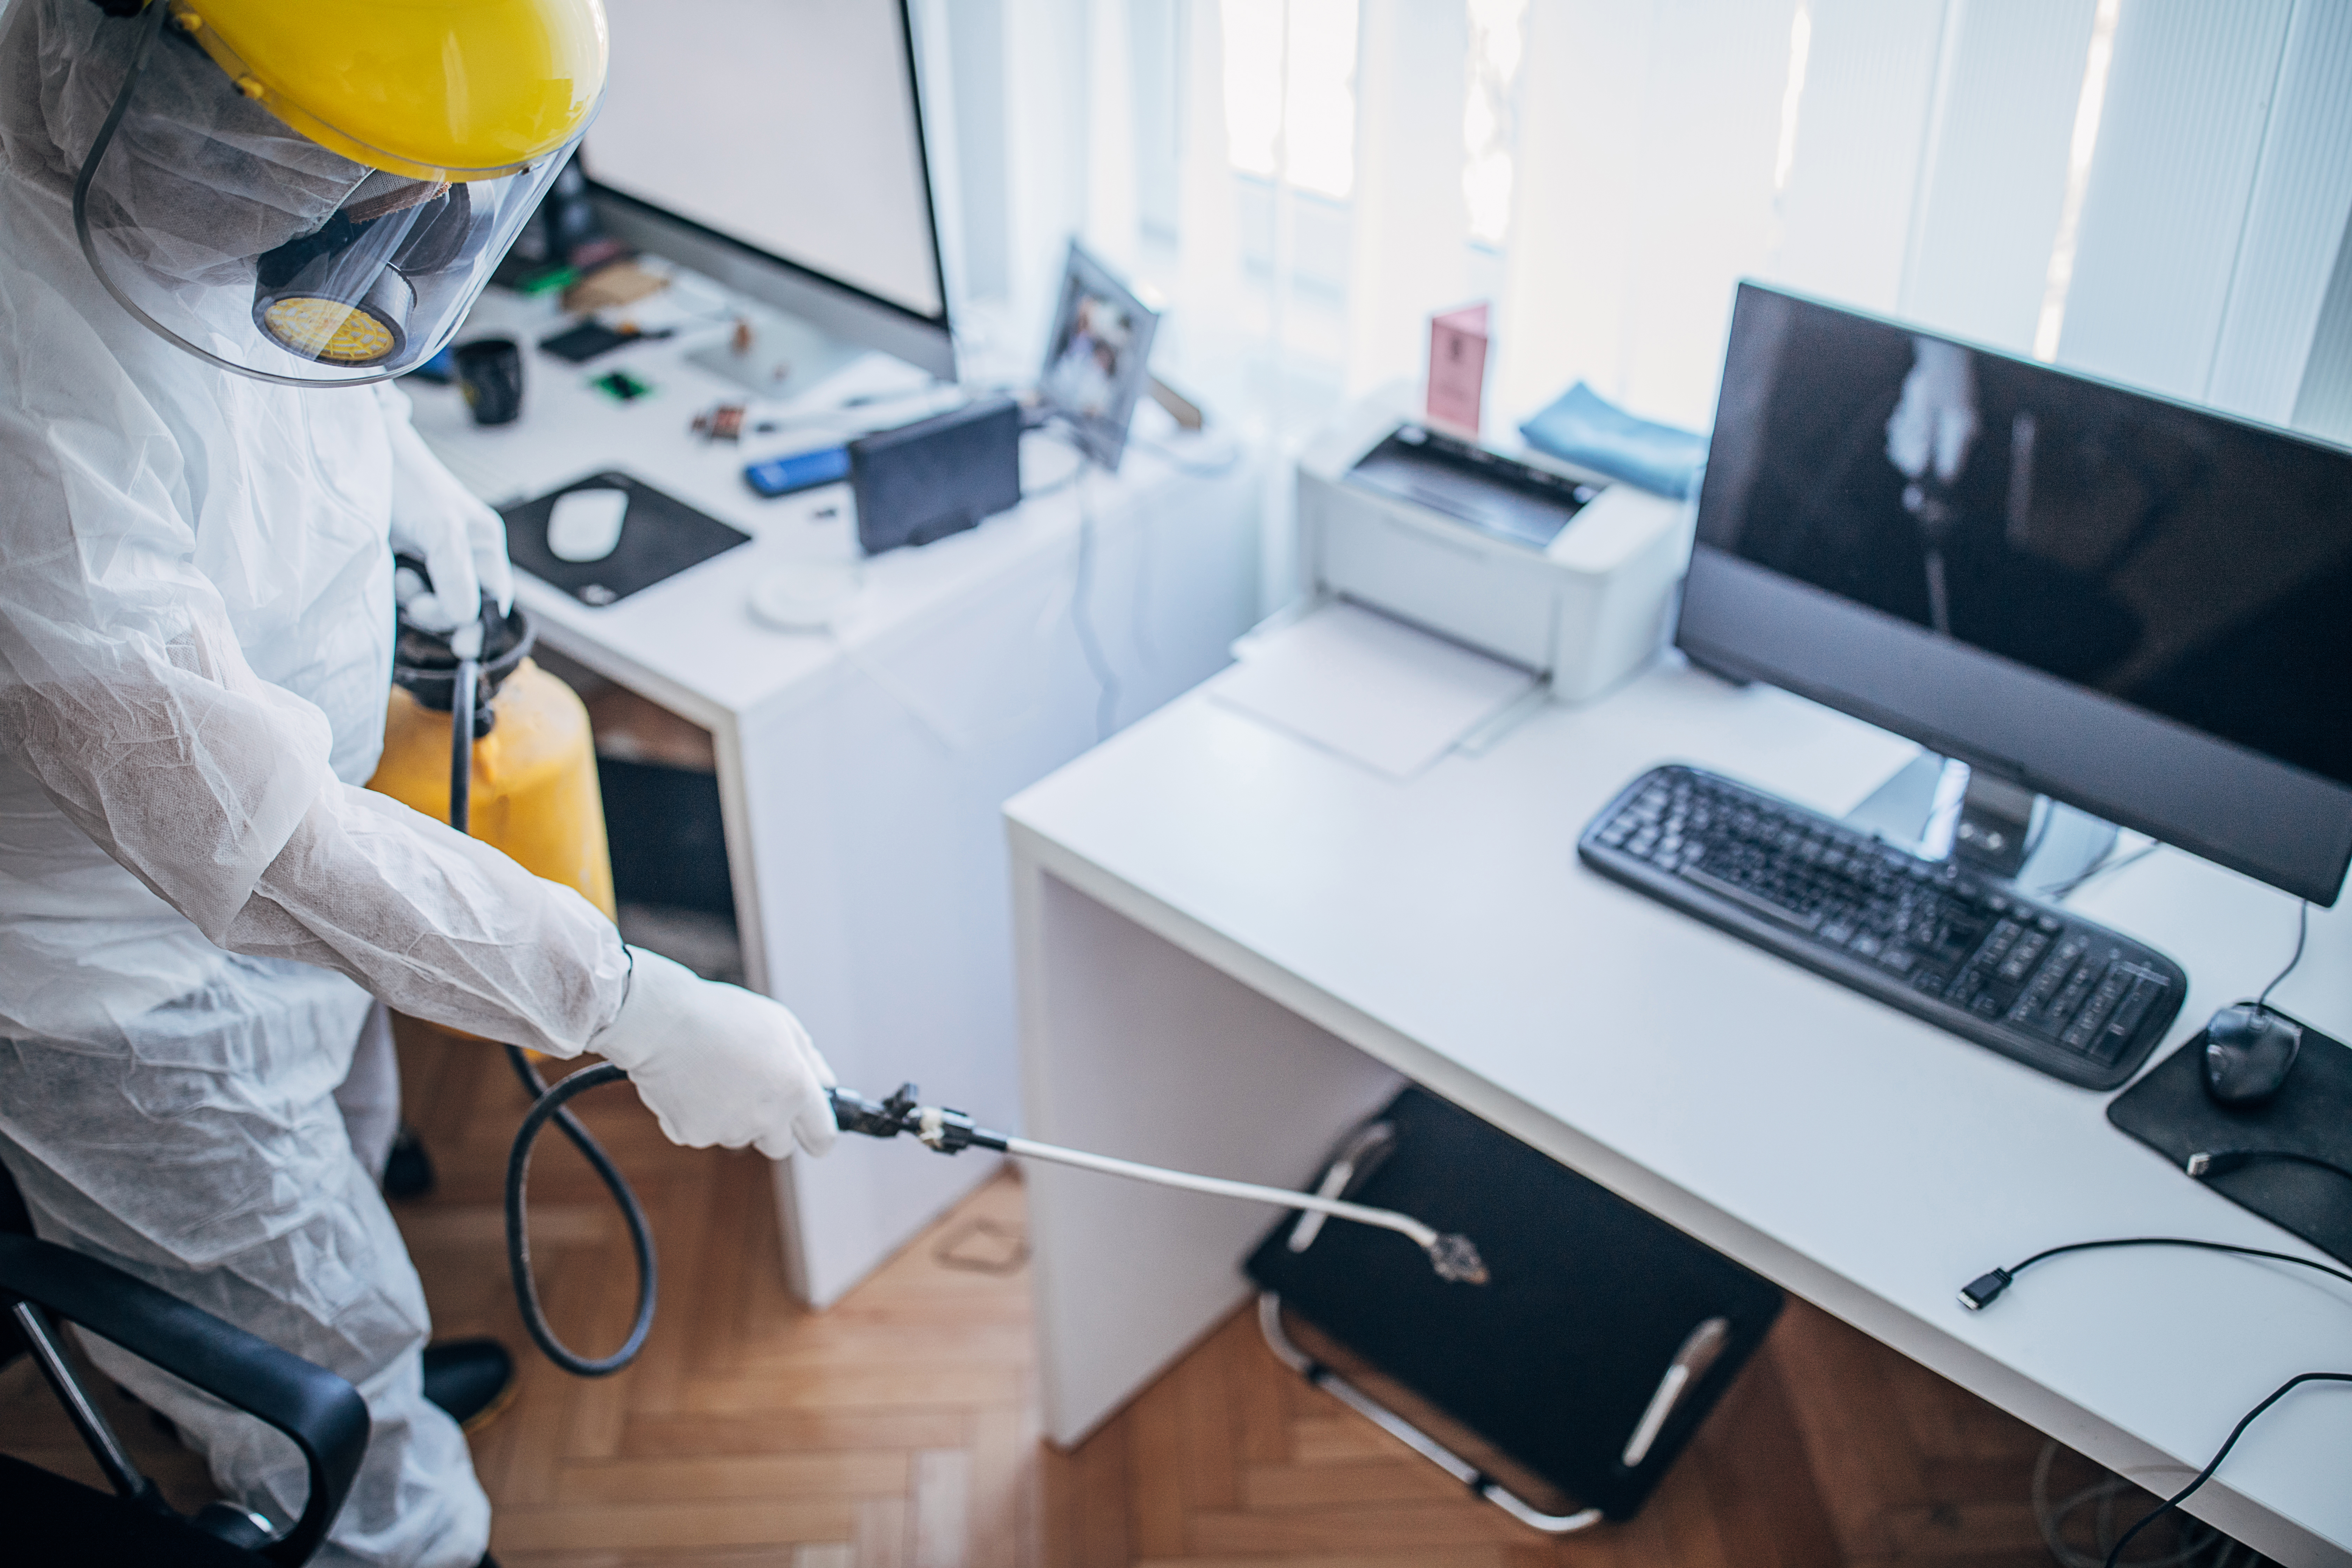 How to Prepare Your Lab for Remote Connectivity